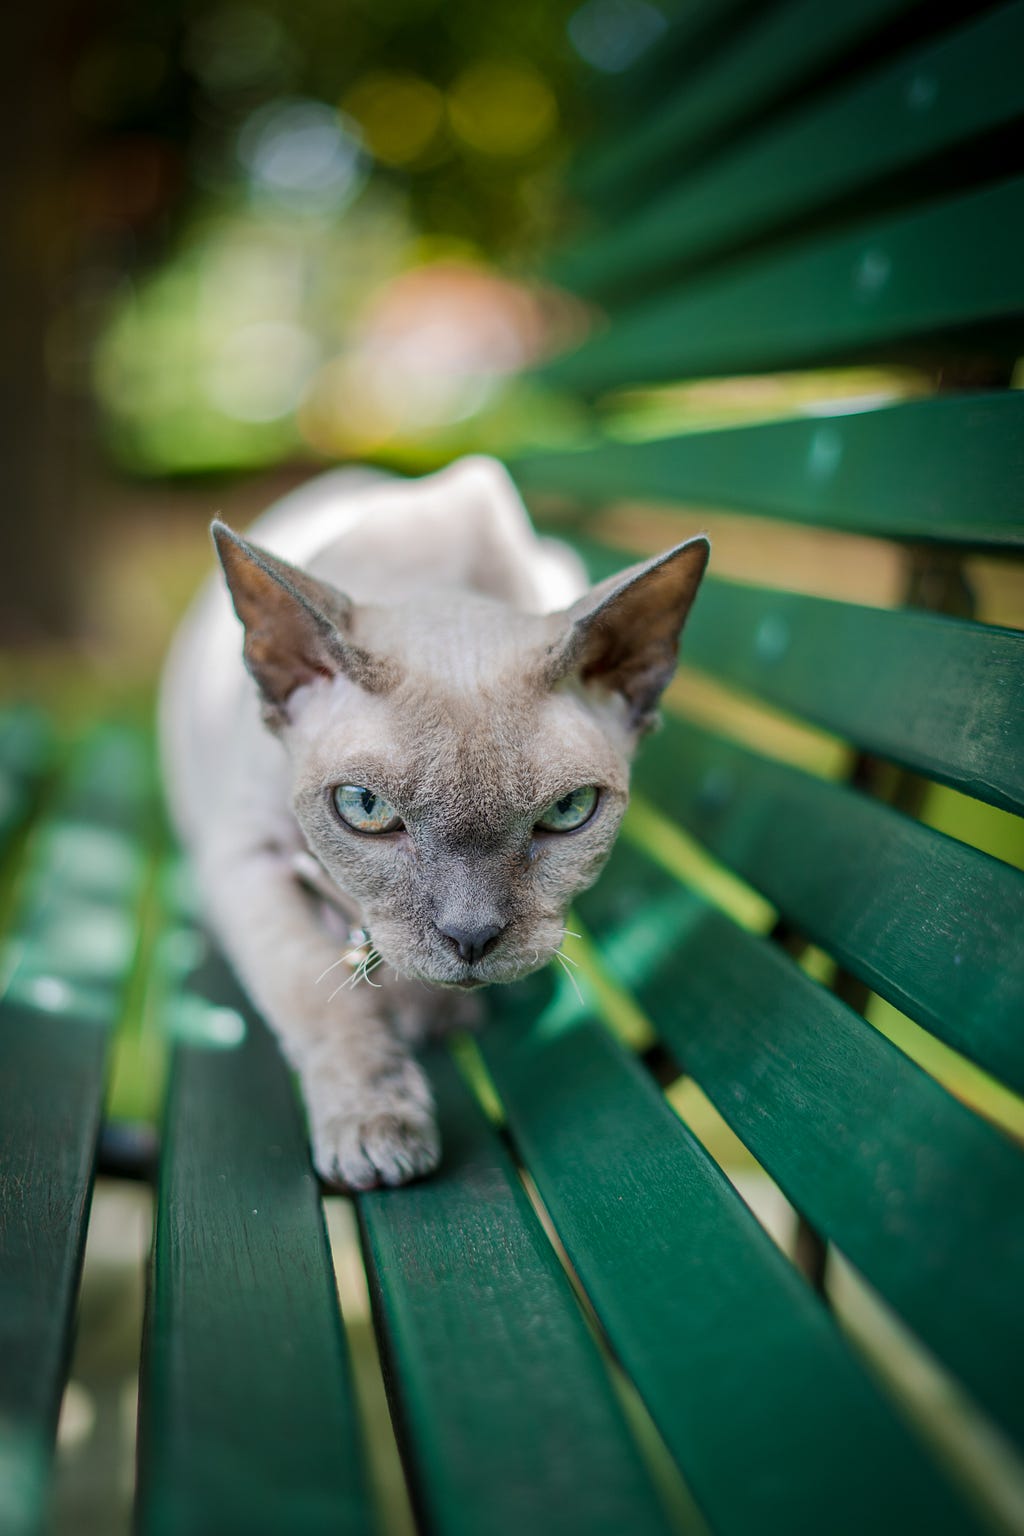 A light-colored cat moving across a green bench in a stalking position